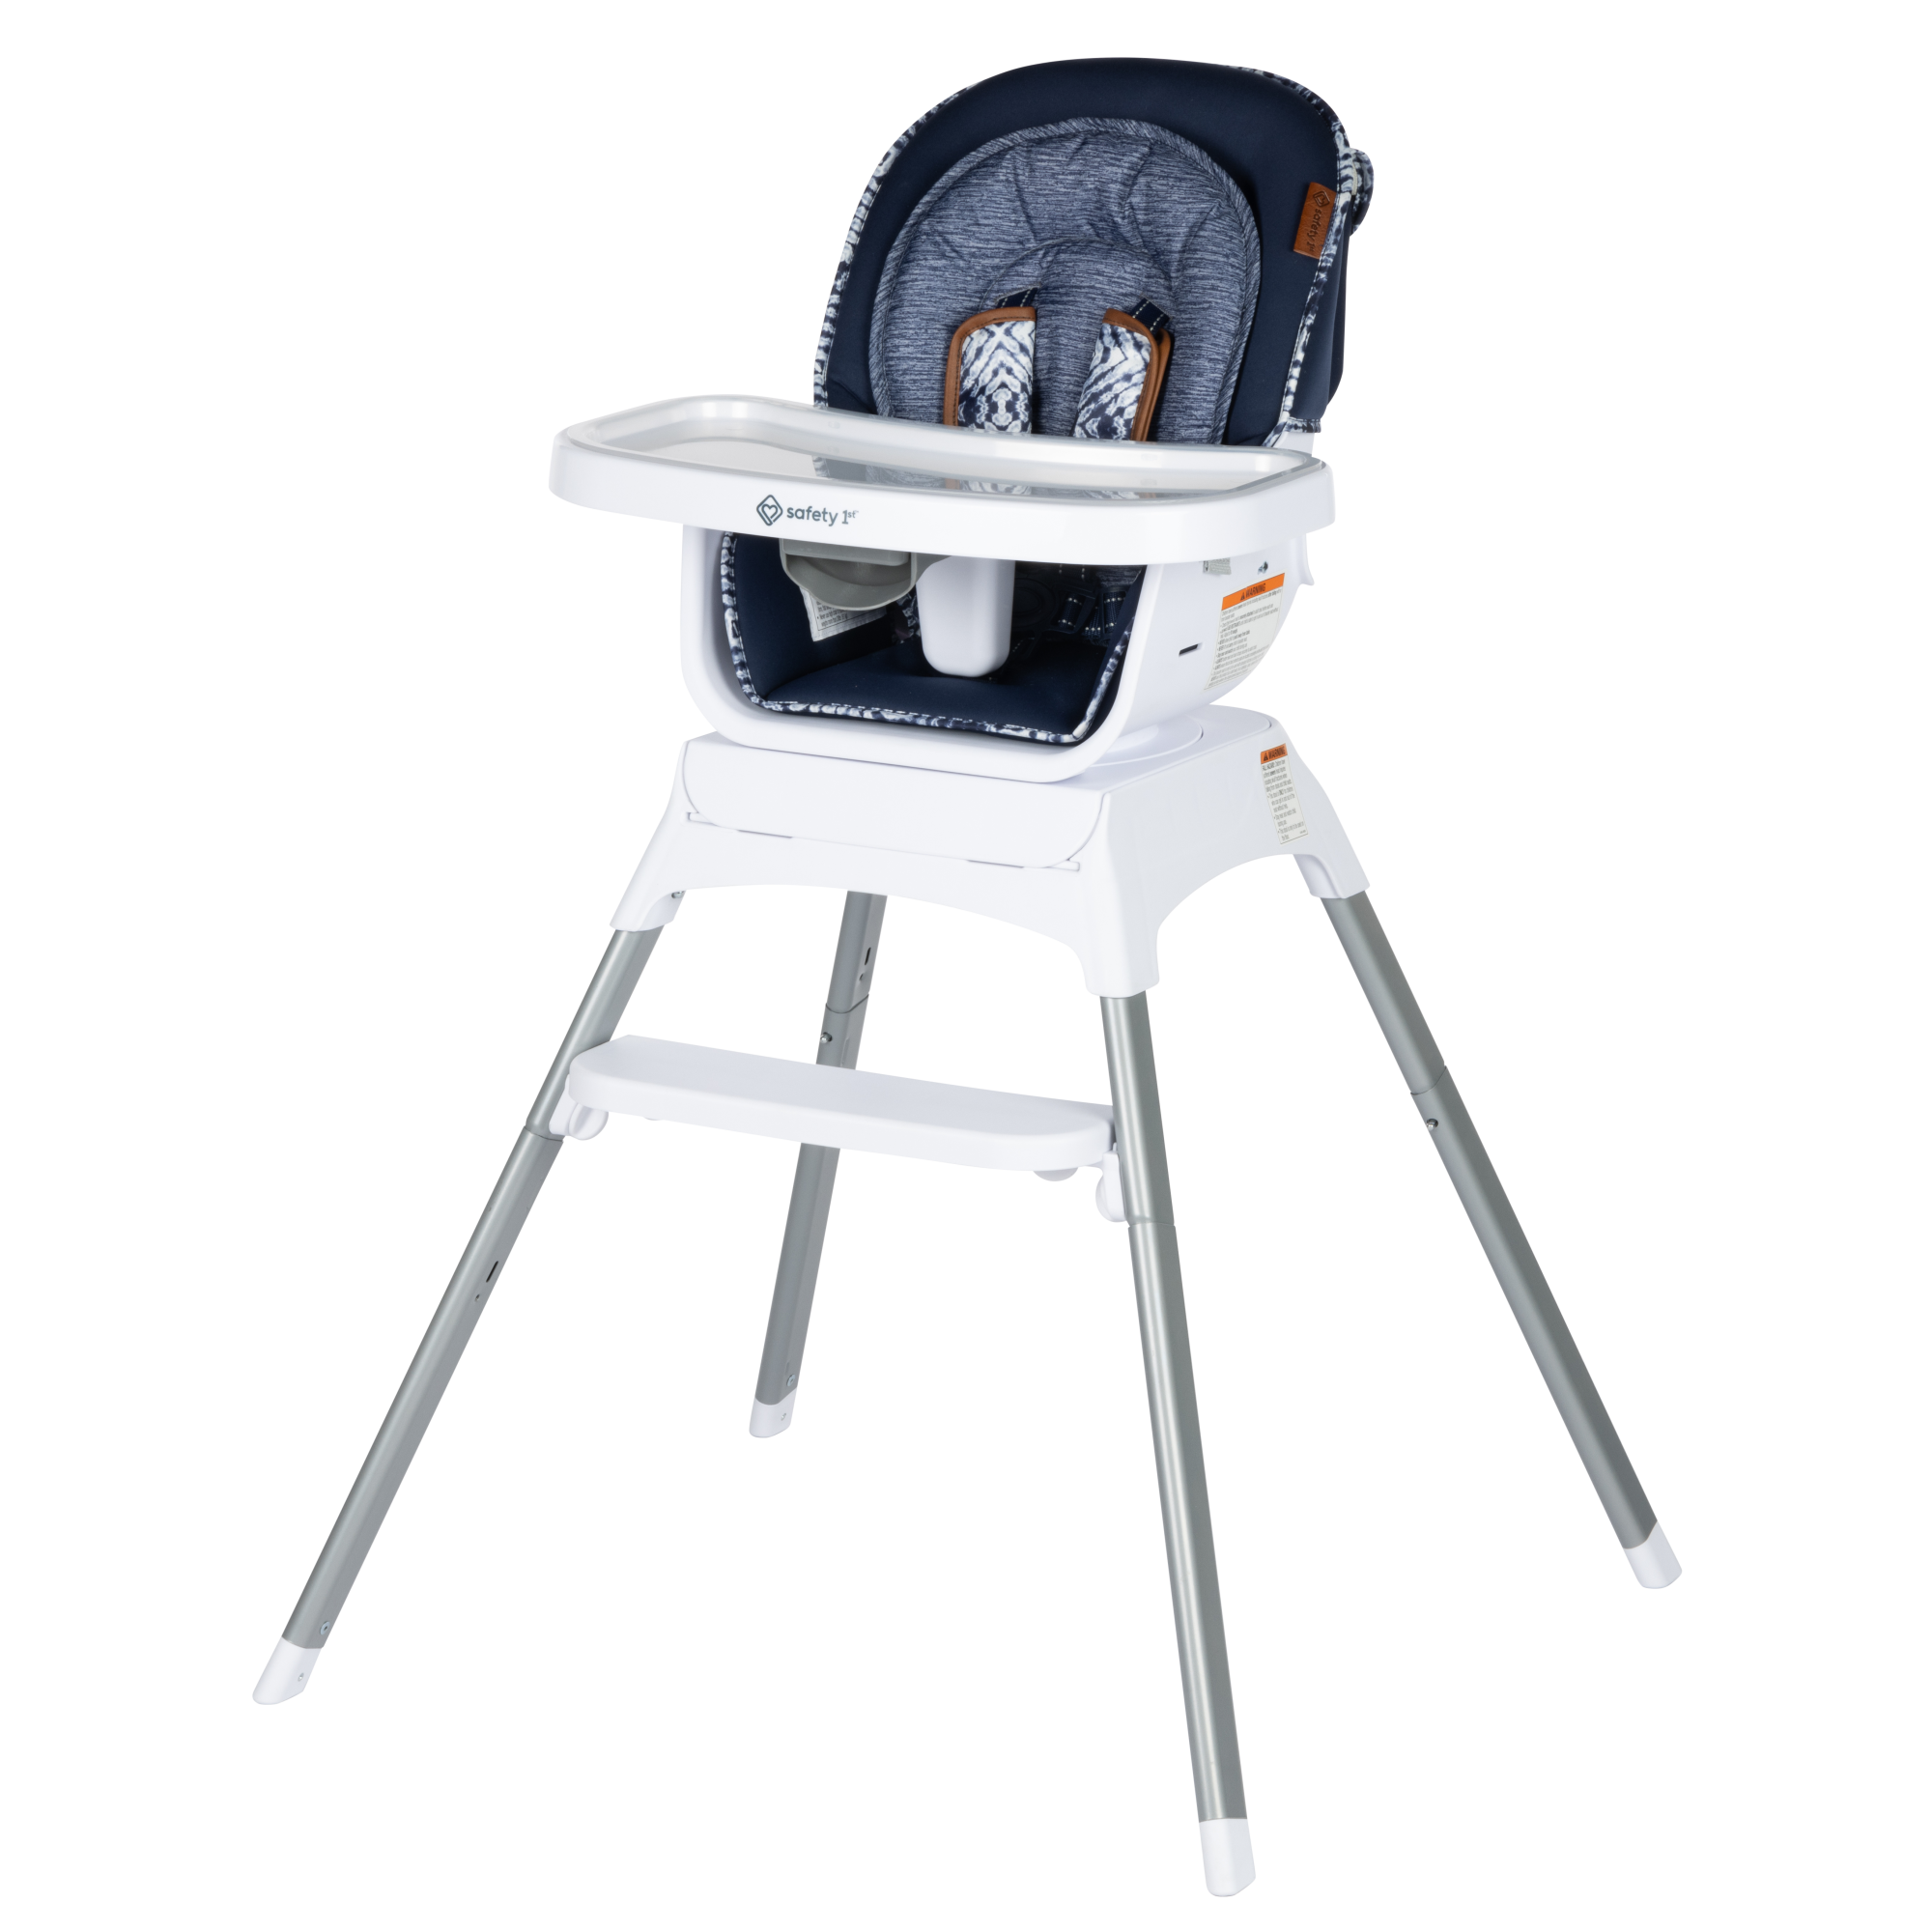 Grow and Go™ Rotating High Chair - 9-in-1 high chair grows with your child from infant to toddler up to 5 years and 50 lbs.